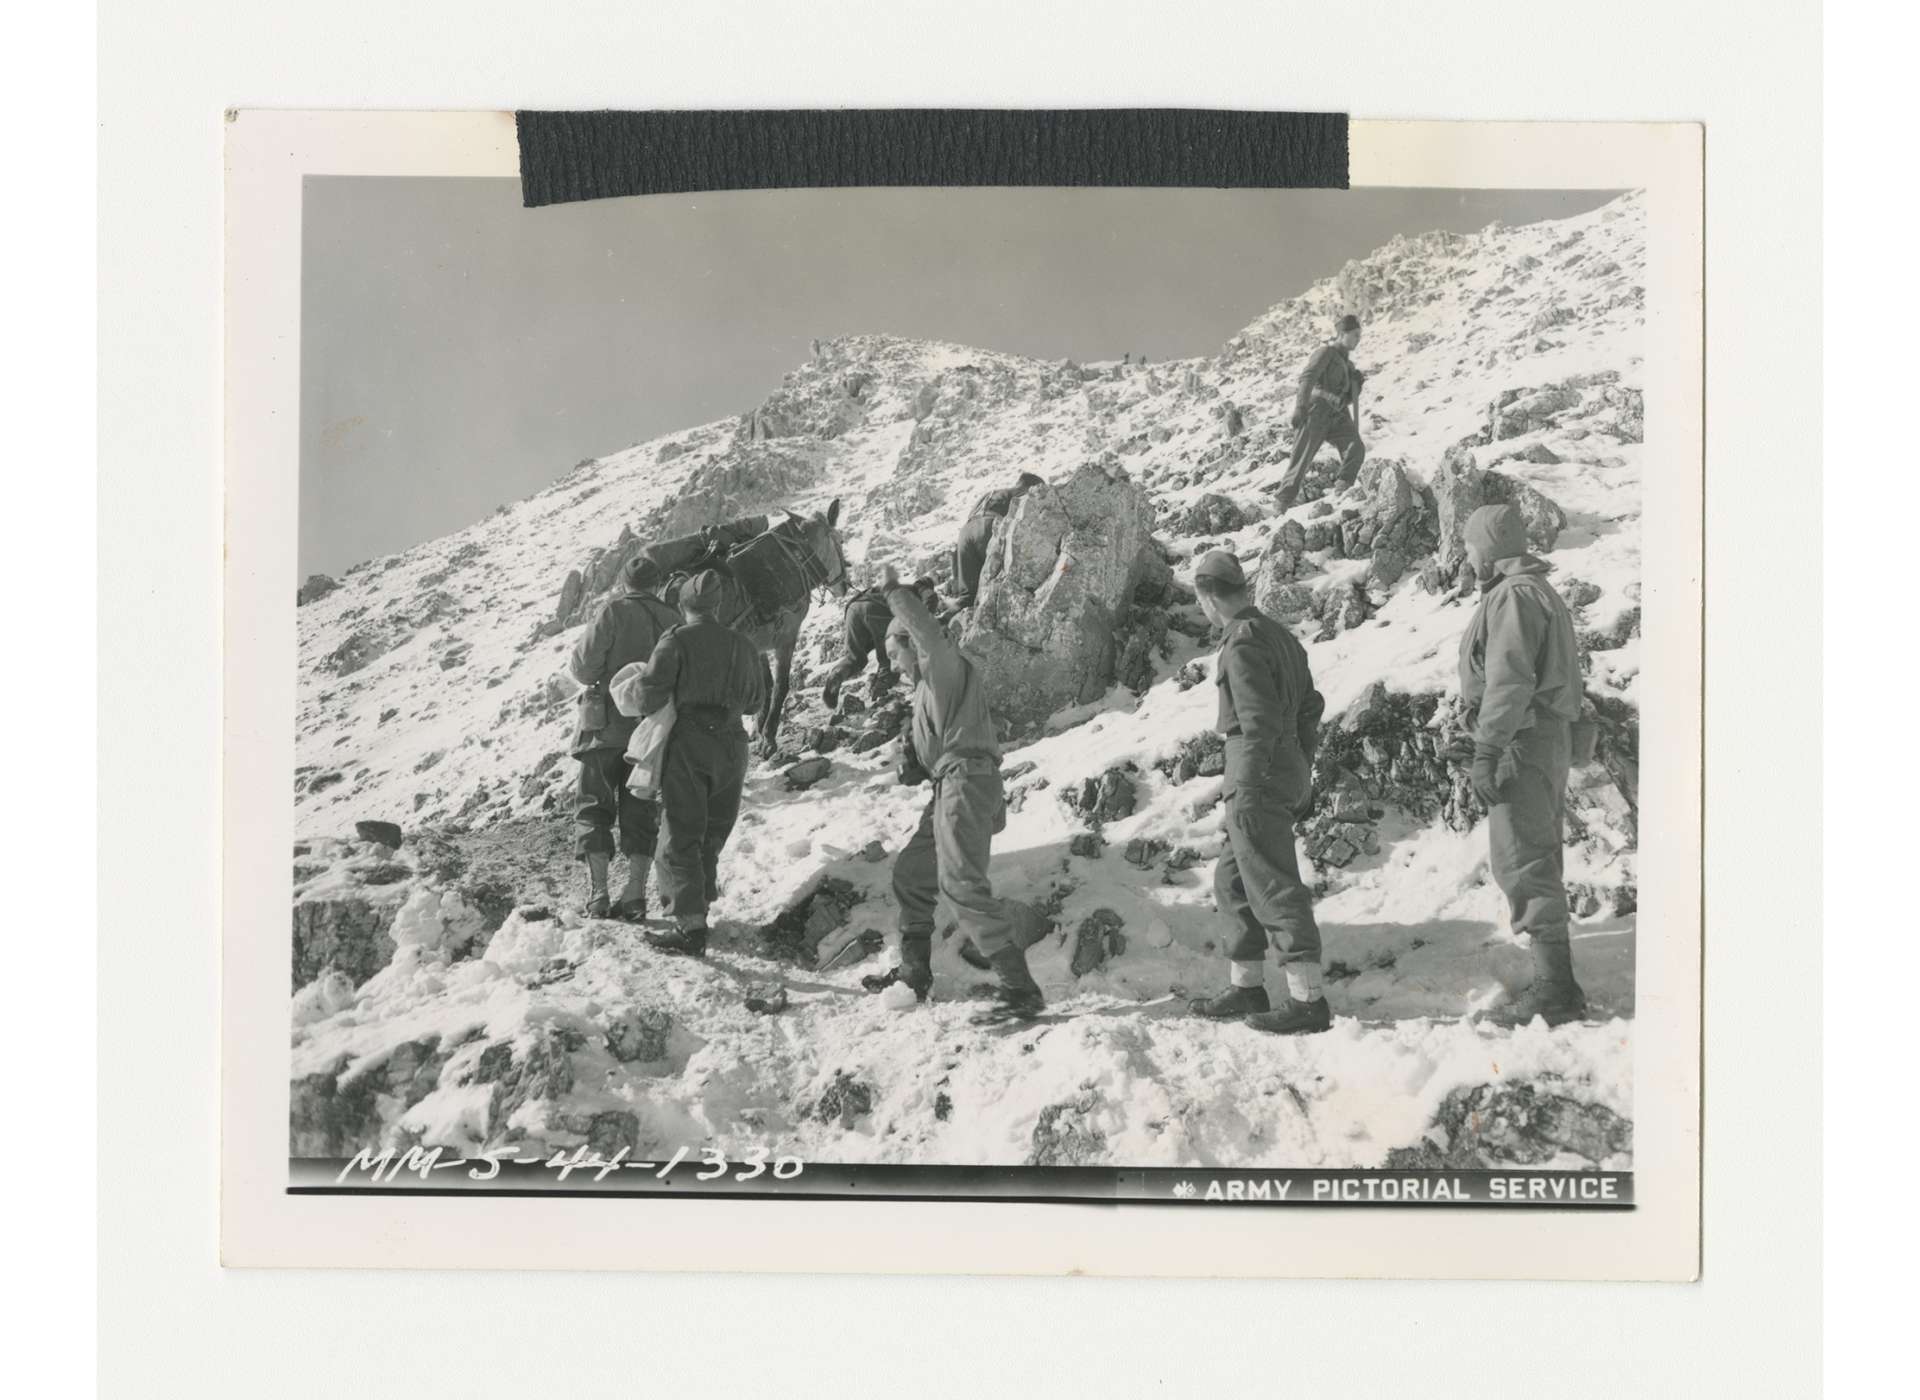 Members of the Polish Carpathian Division with pack mule navigate a mountainous area, February 18, 1944. US Army Signal Corps photo, gift of Ms. Regan Forrester, from the Collection of The National WWII Museum, 2002.337.123.